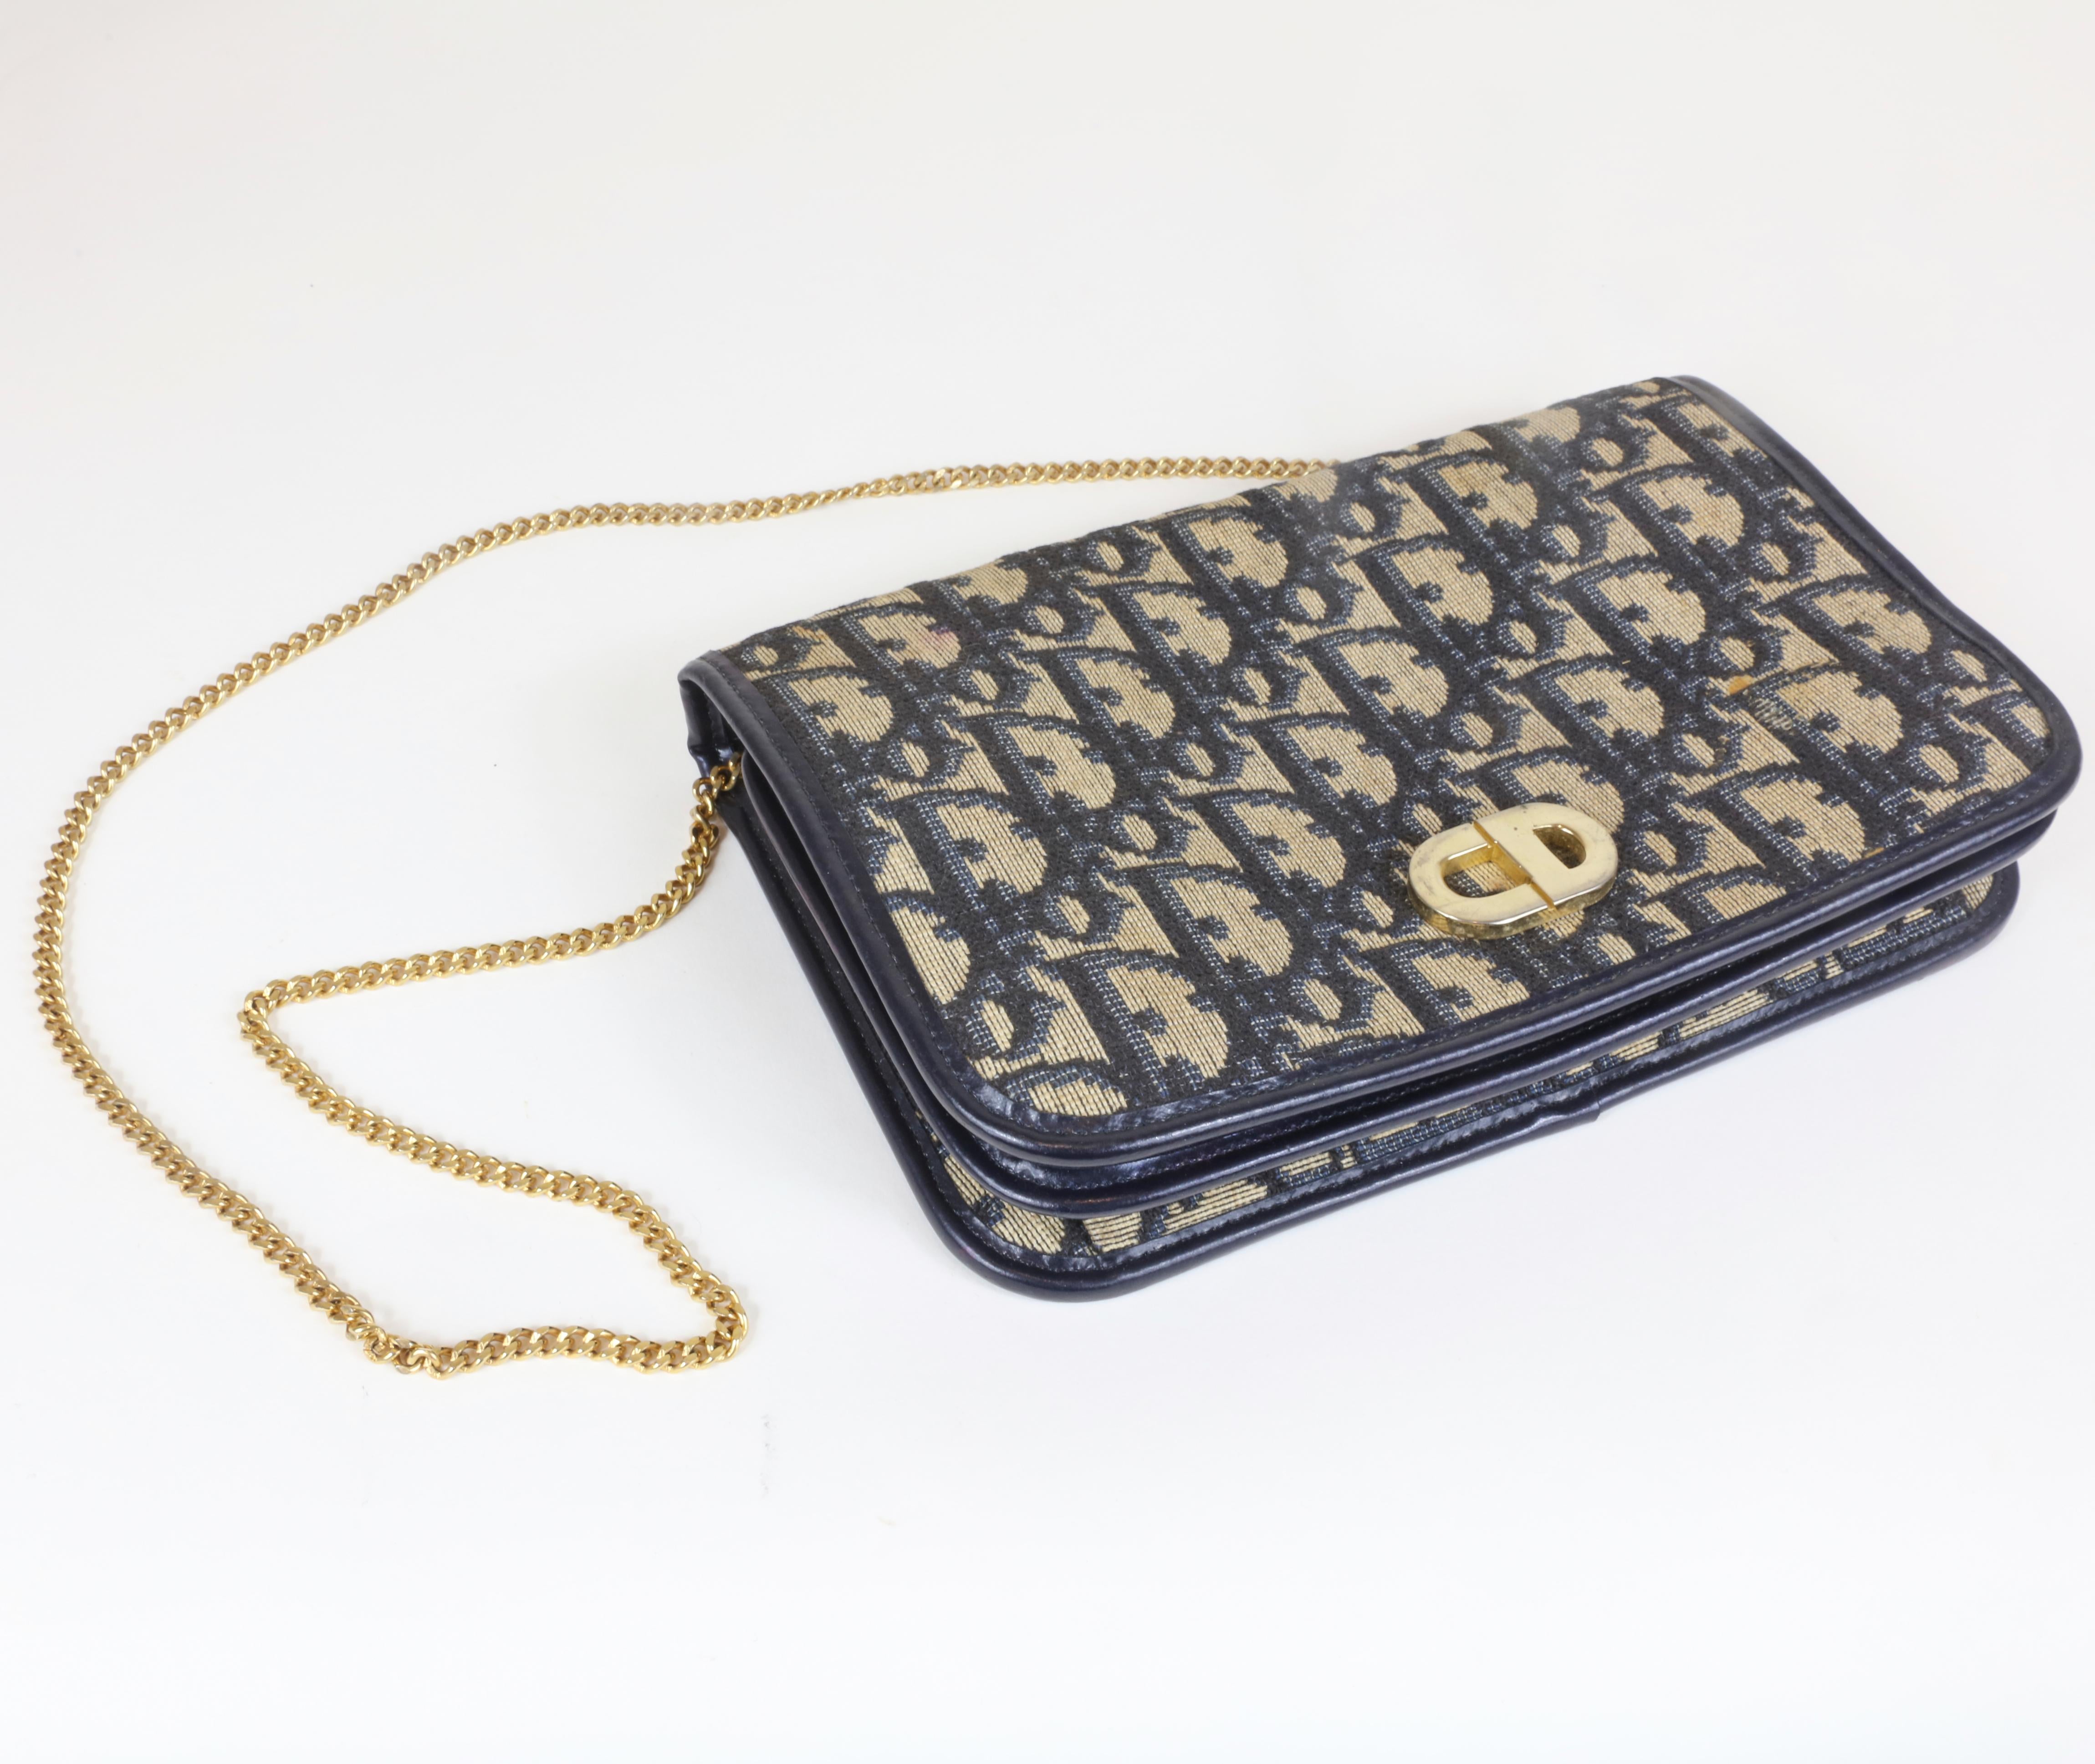 Gray Vintage Christian Dior Navy Leather/Cloth Clutch with Chain Strap